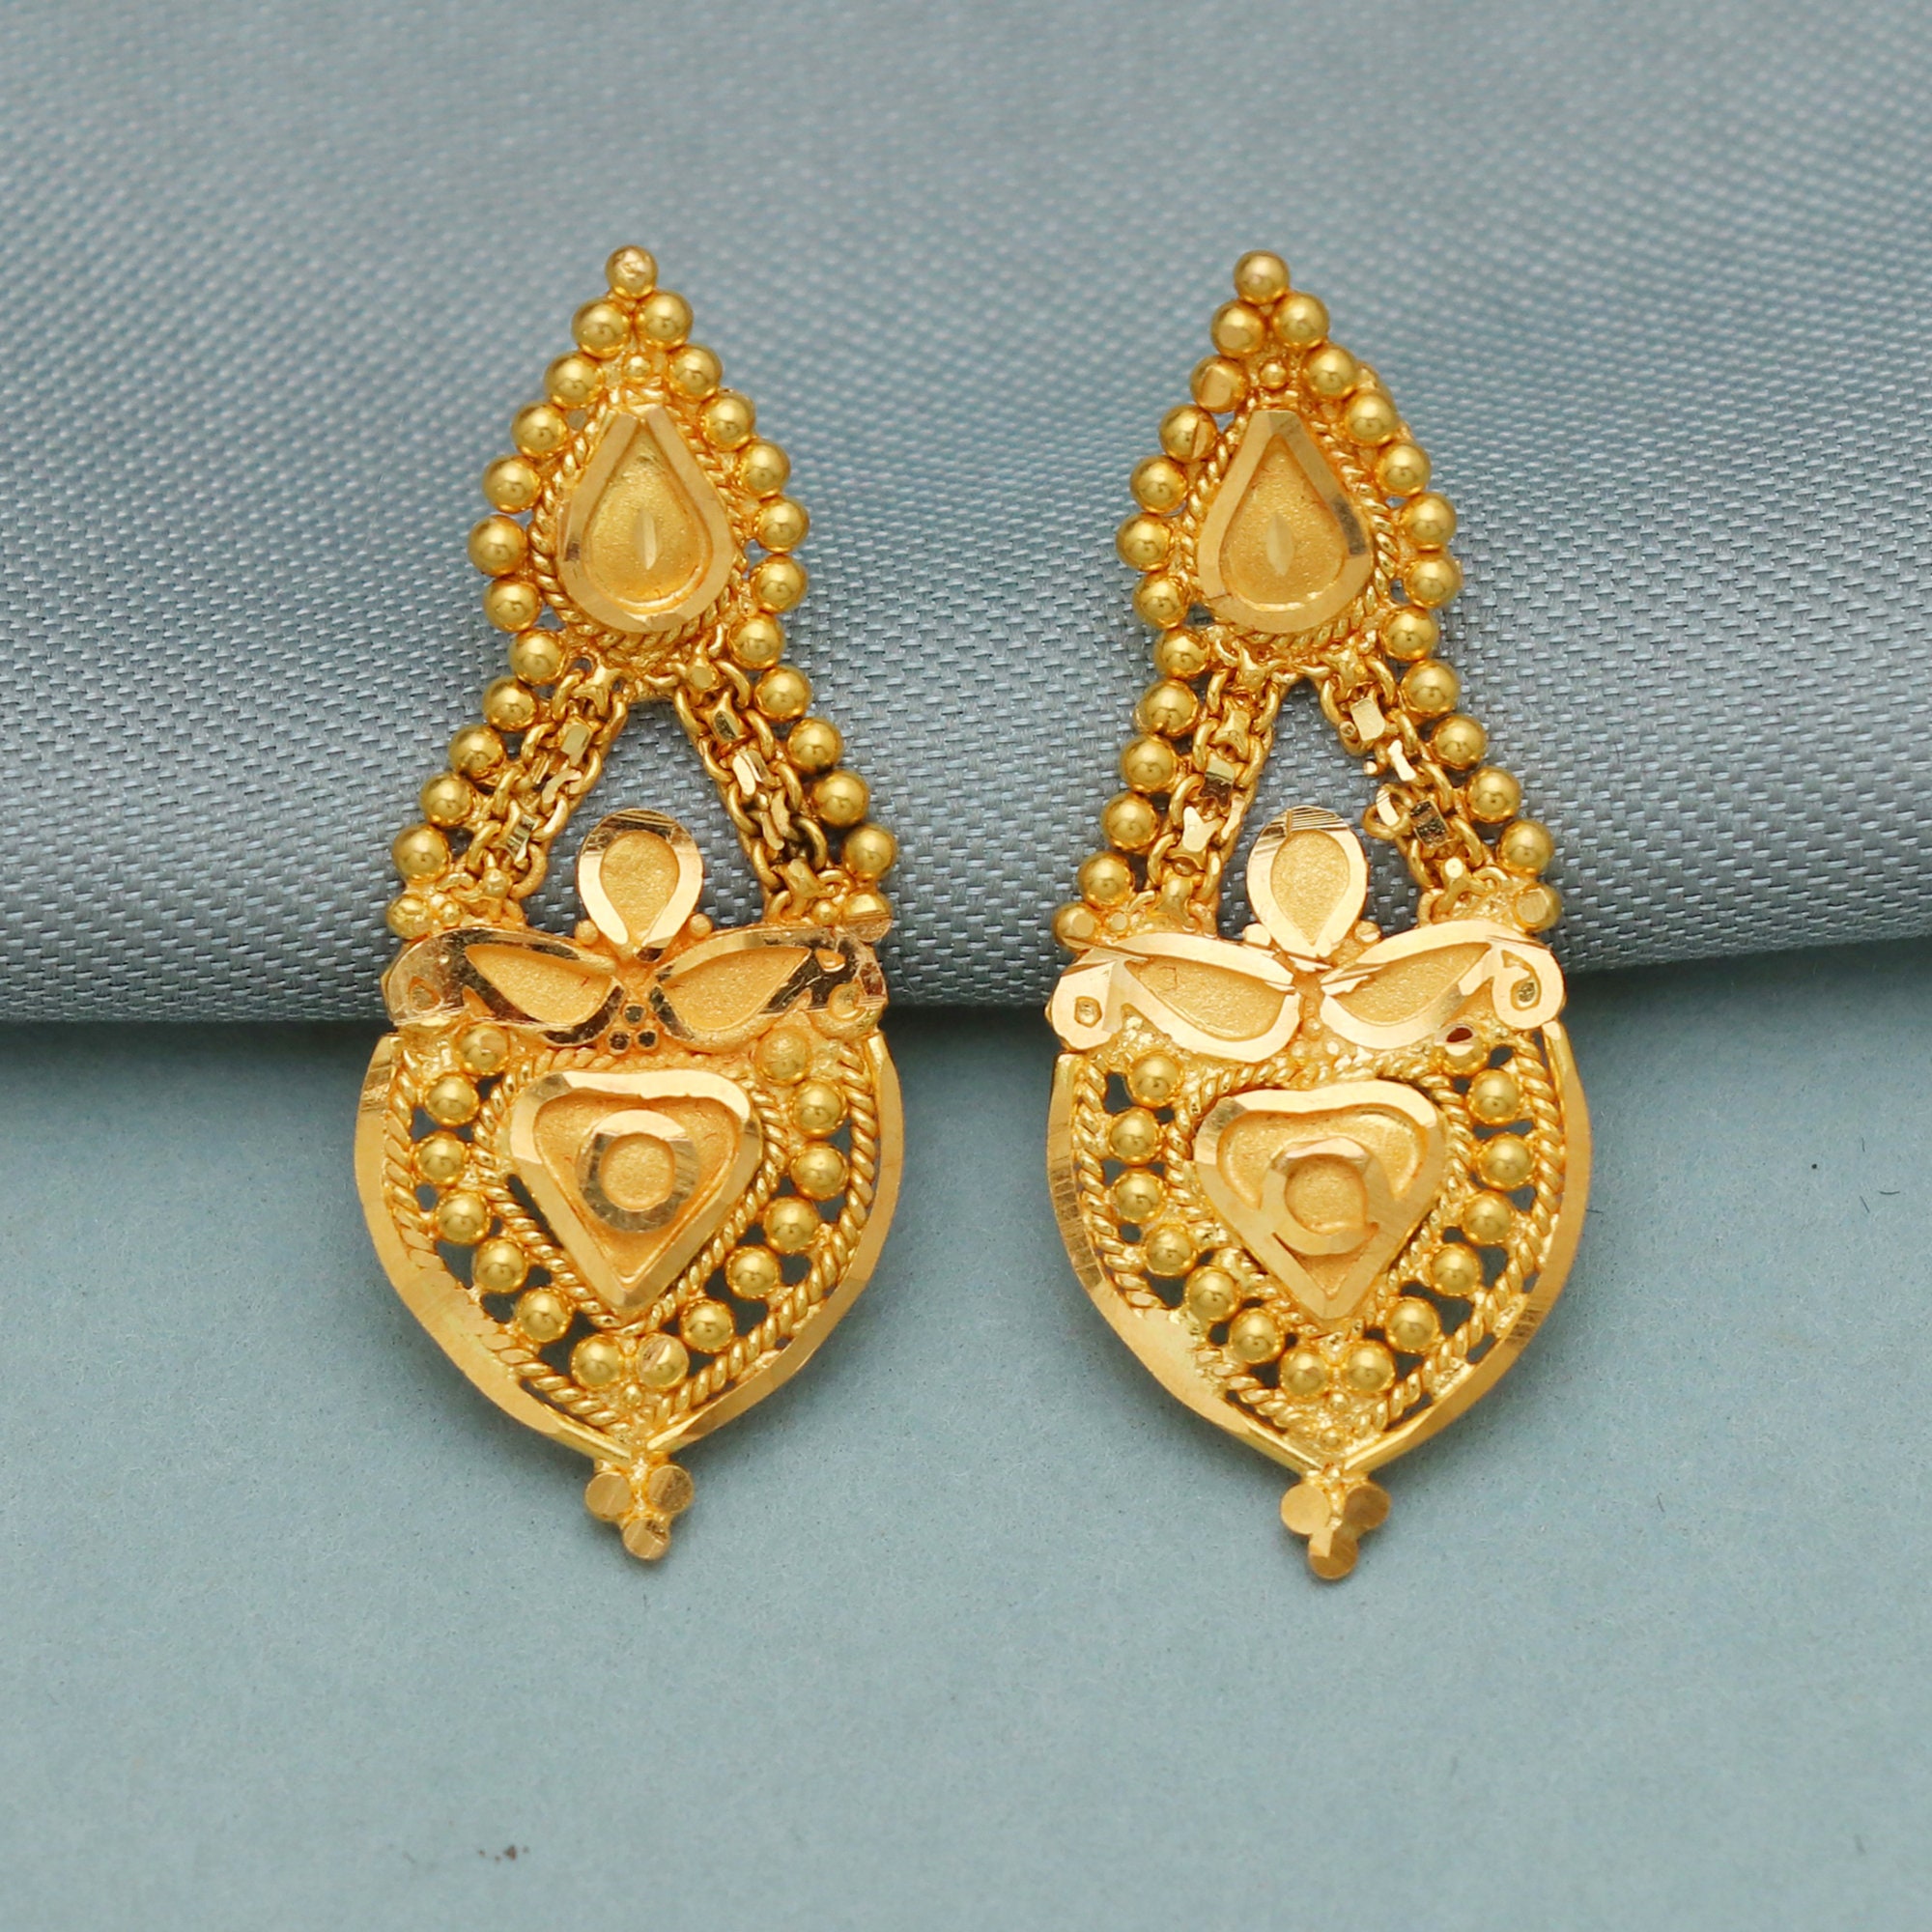 Two solid gold earrings Java, Indonesia, 7th - 12th century |  印尼爪哇七至十二世紀金耳飾一組兩件| Magnificent Lustre – Southeast Asian Gold Jewellery and  Ornaments